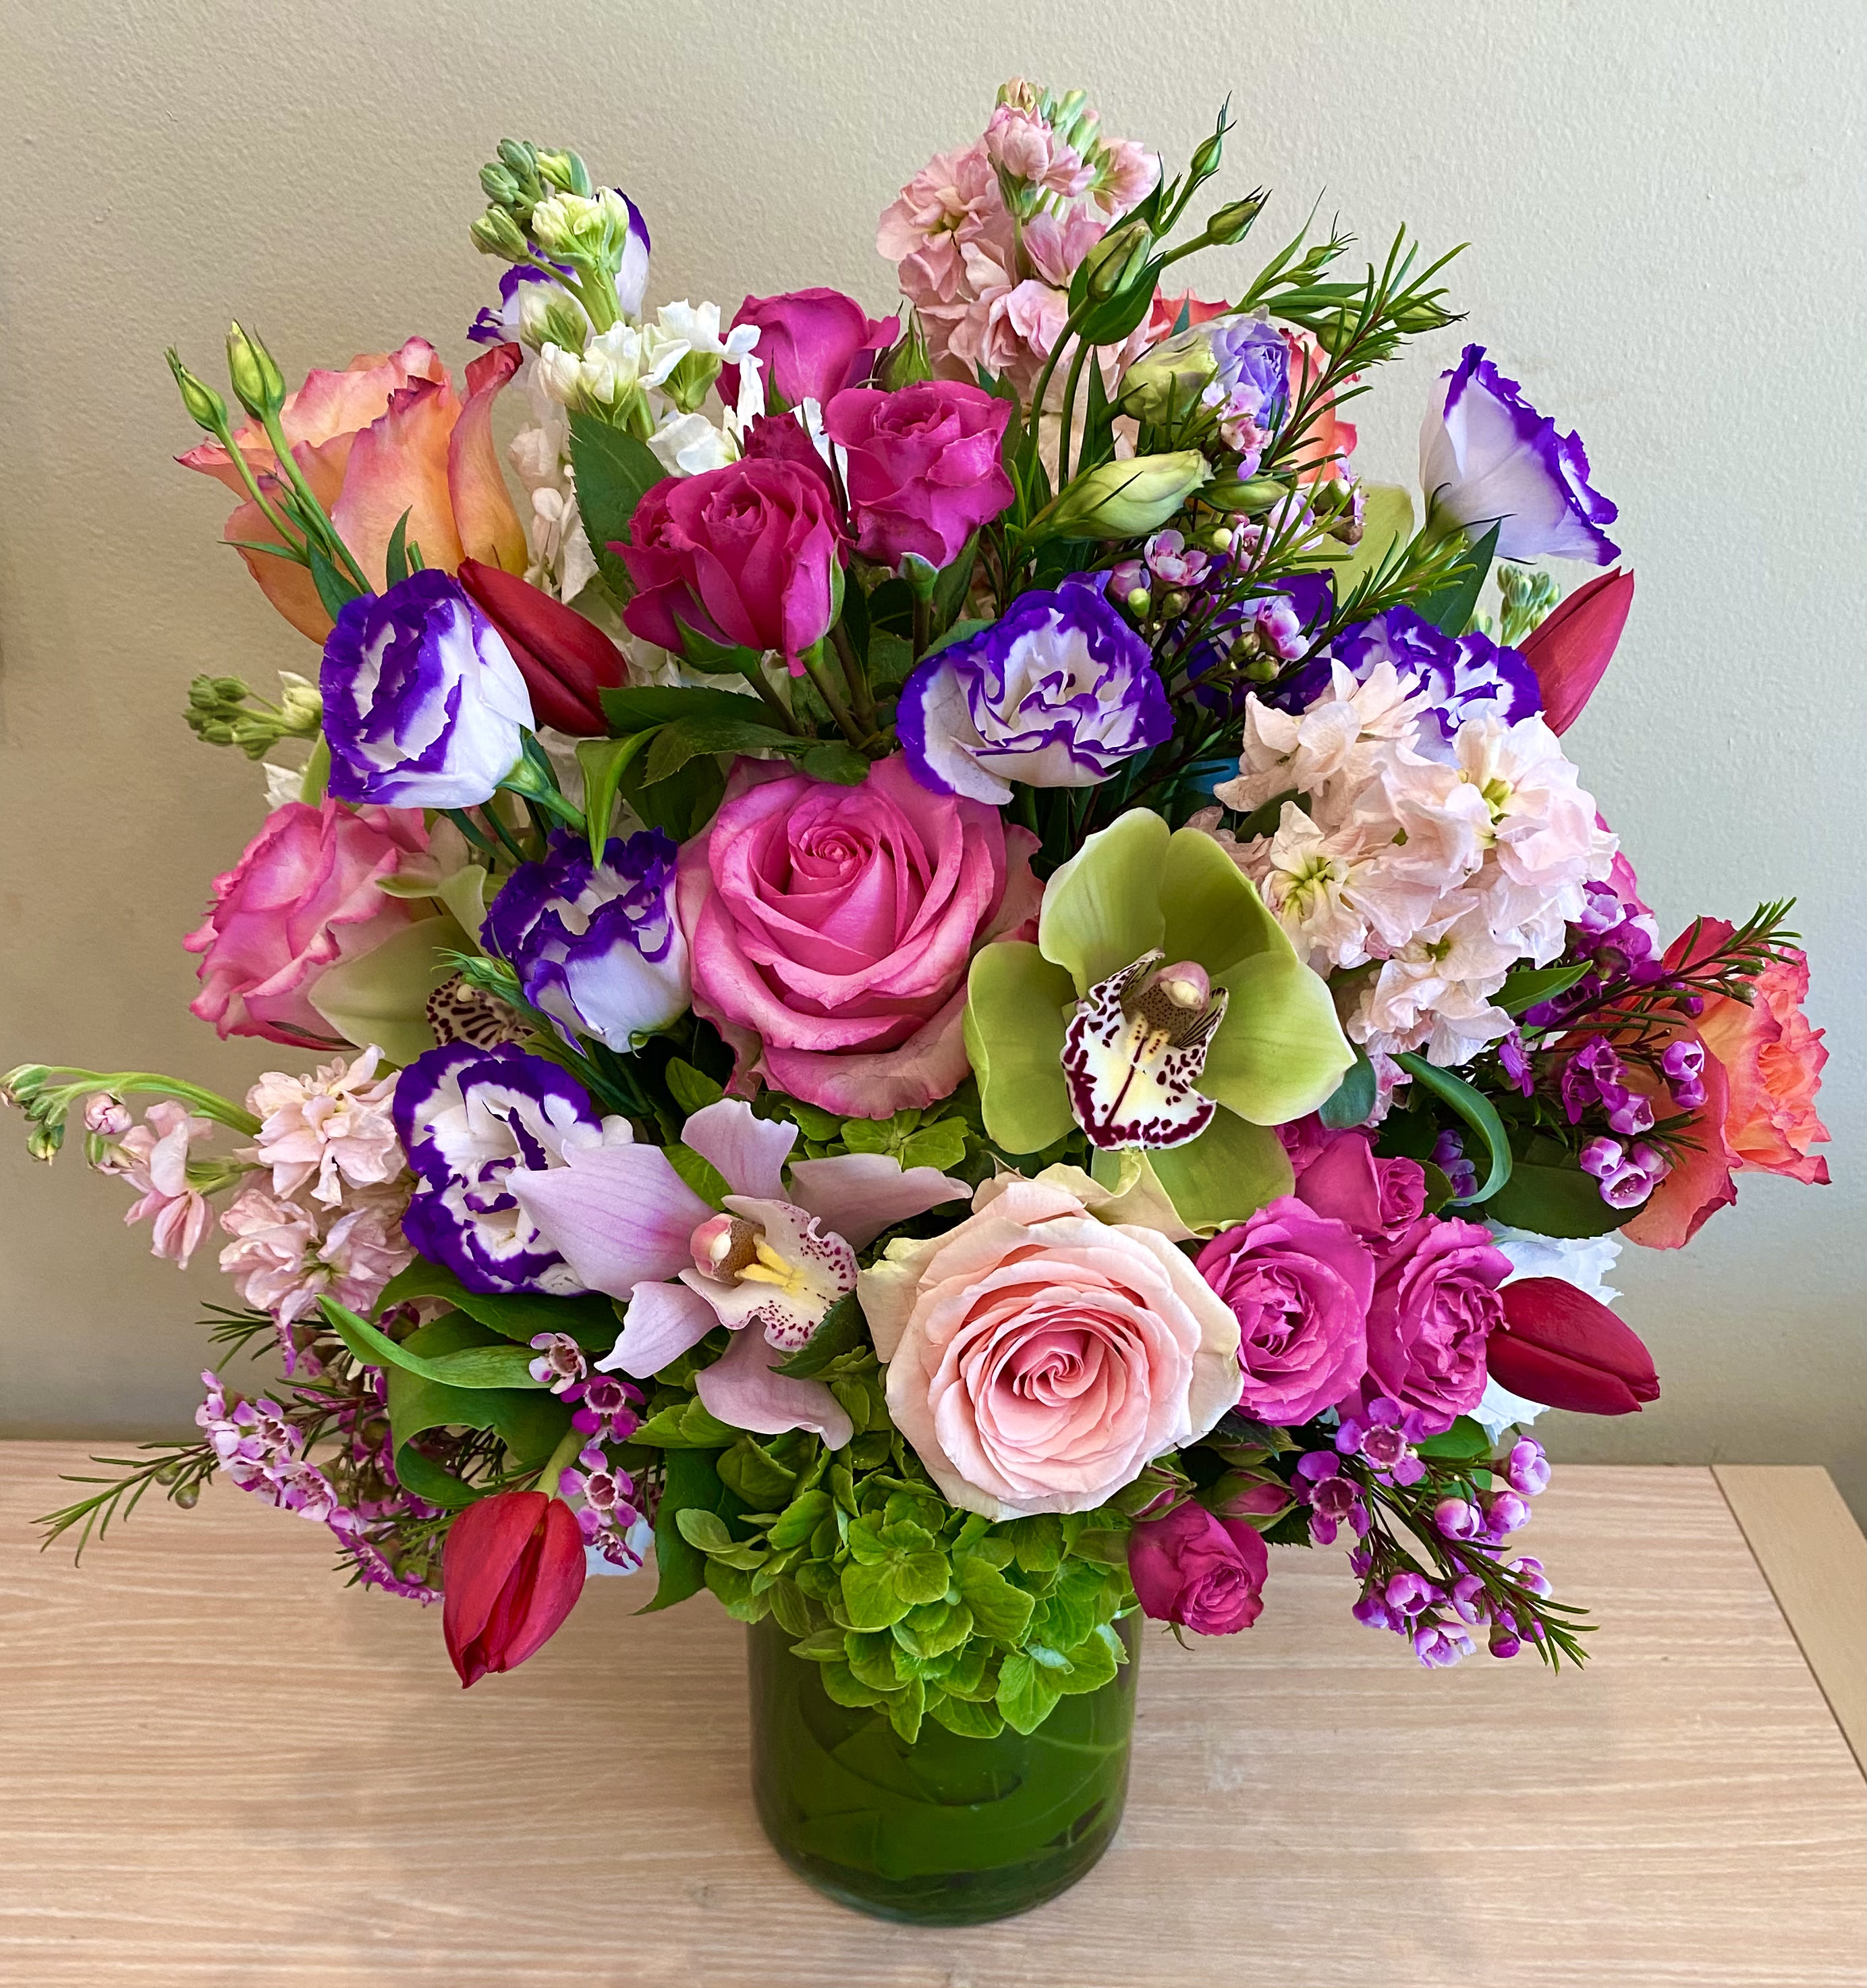 Only You - A lavish garden style ensemble of stock, roses, tulips, lisianthus, hydrangea, etc in a colorful spring mix. Appropriate flower substitutions will be made as per availability, colors and design style will be the same.  Approximately 18-20” tall &amp; wide.